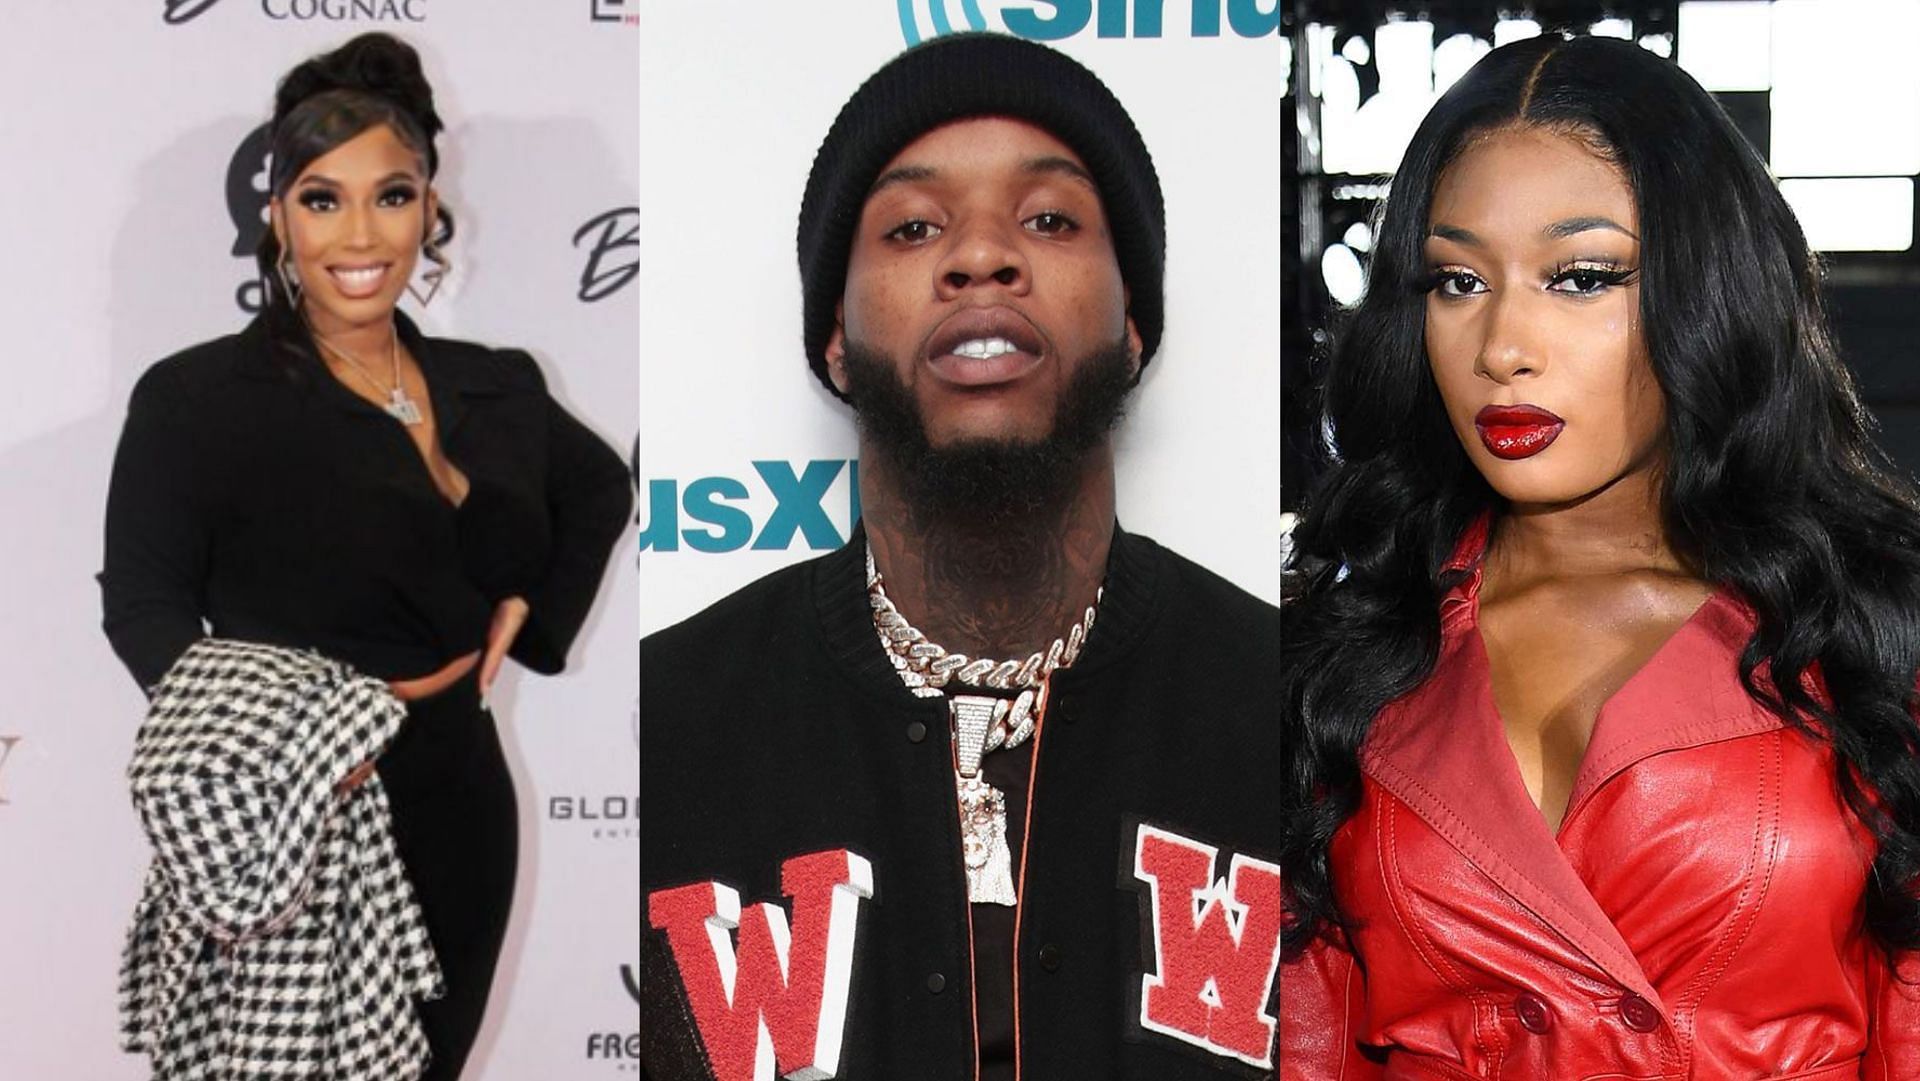 Megan Thee Stallion was allegedly &quot;jealous&quot; of Kylie Jenner and Tory Lanez. (Image via itskelseynicole_/Instagram, Cindy Ord/Getty, Dimitrios Kambouris/Getty )